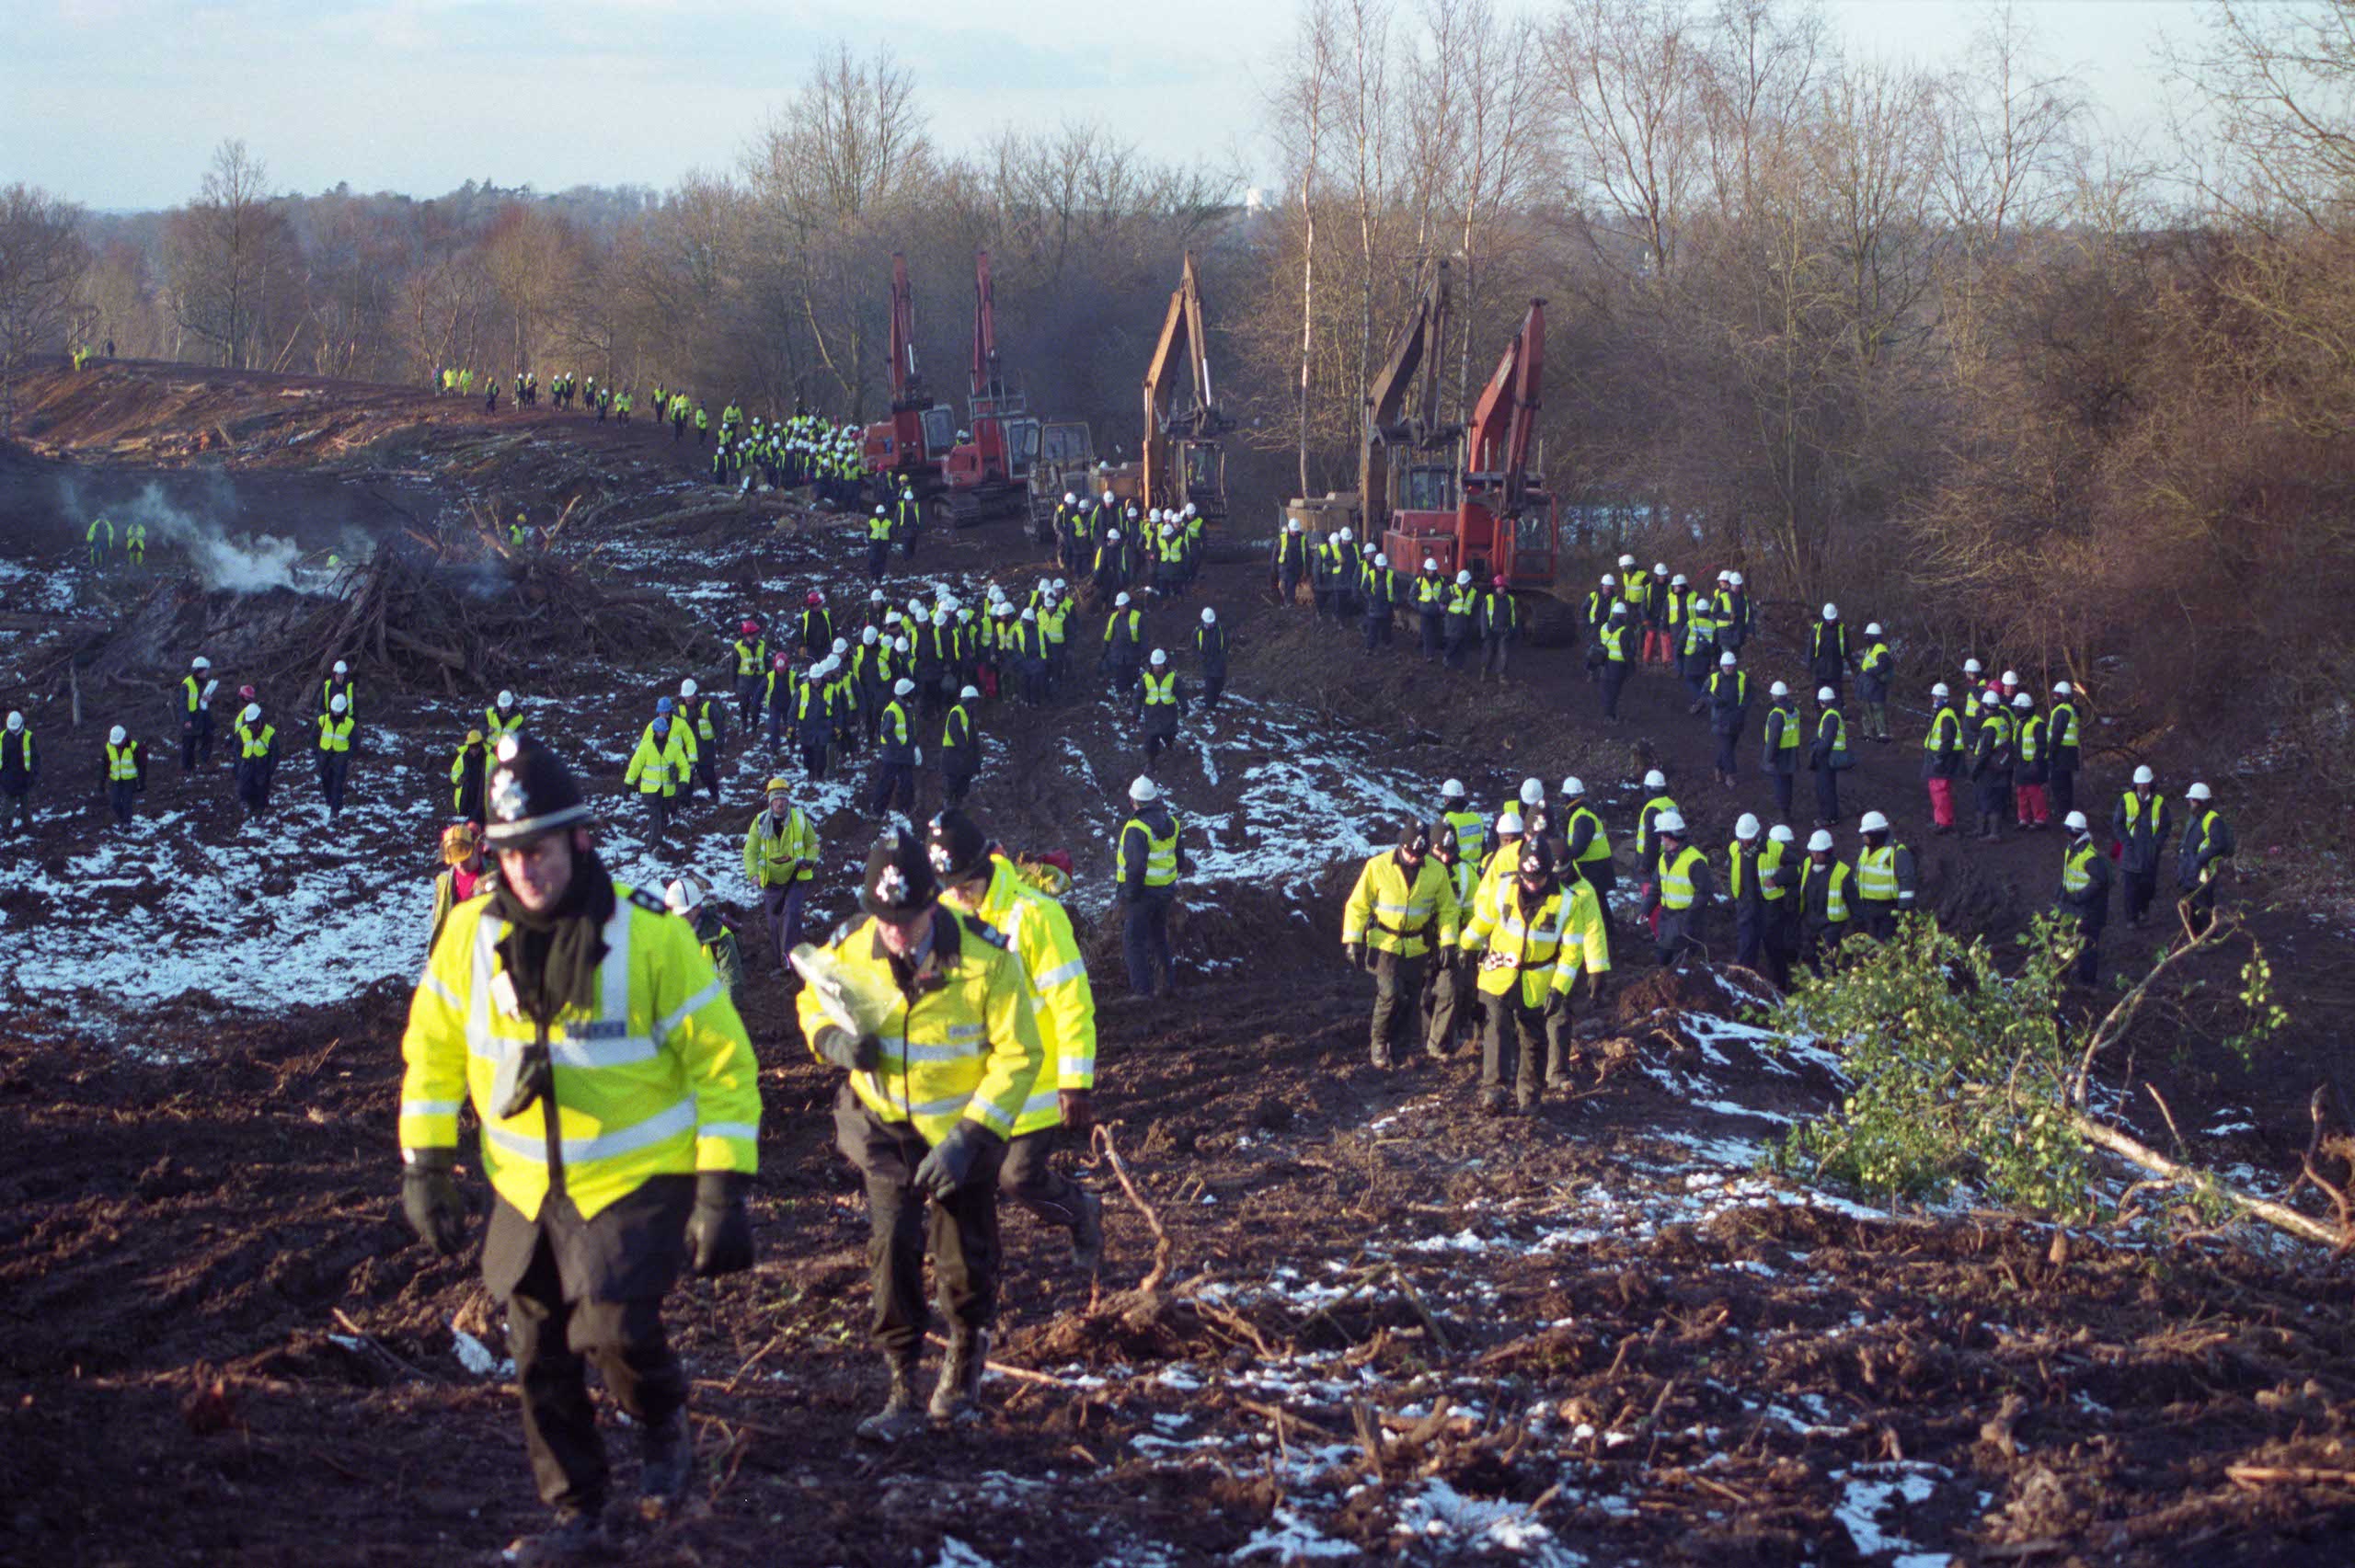 A long line of police in high vis jackets walk over mud and by trees